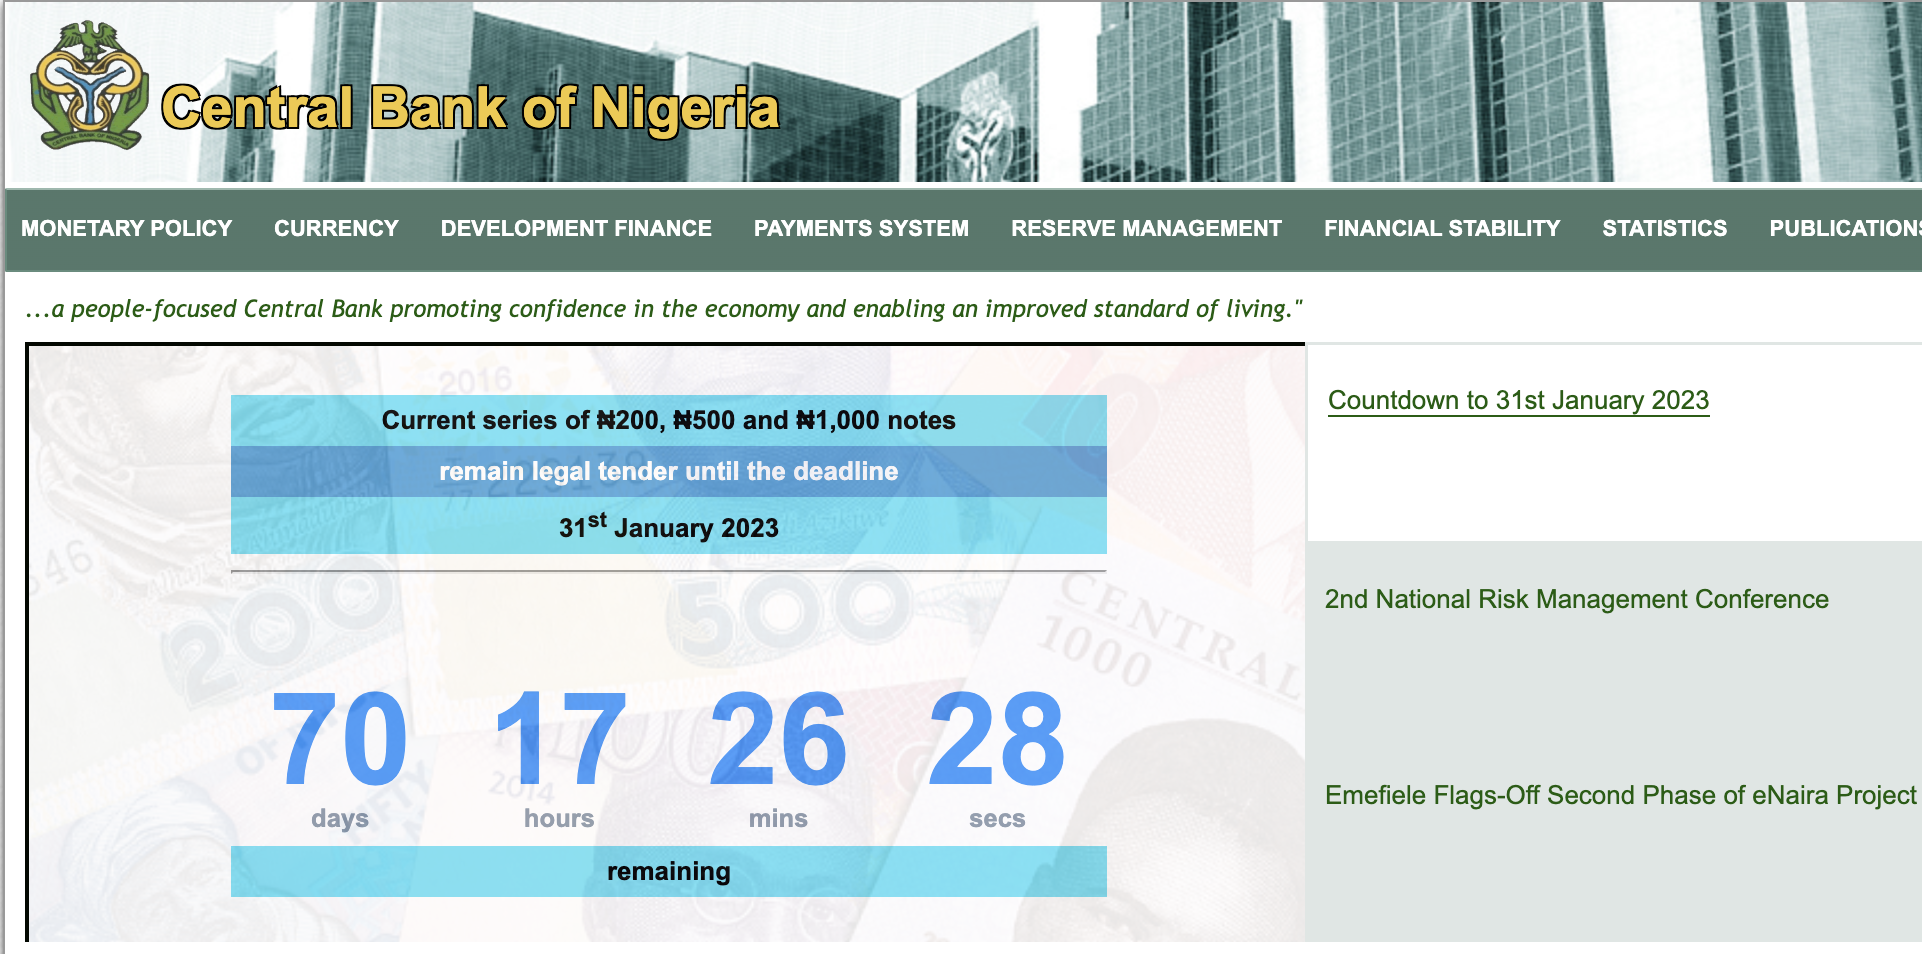 CBN Sets Countdown Clock On Its Website For Naira Redesign